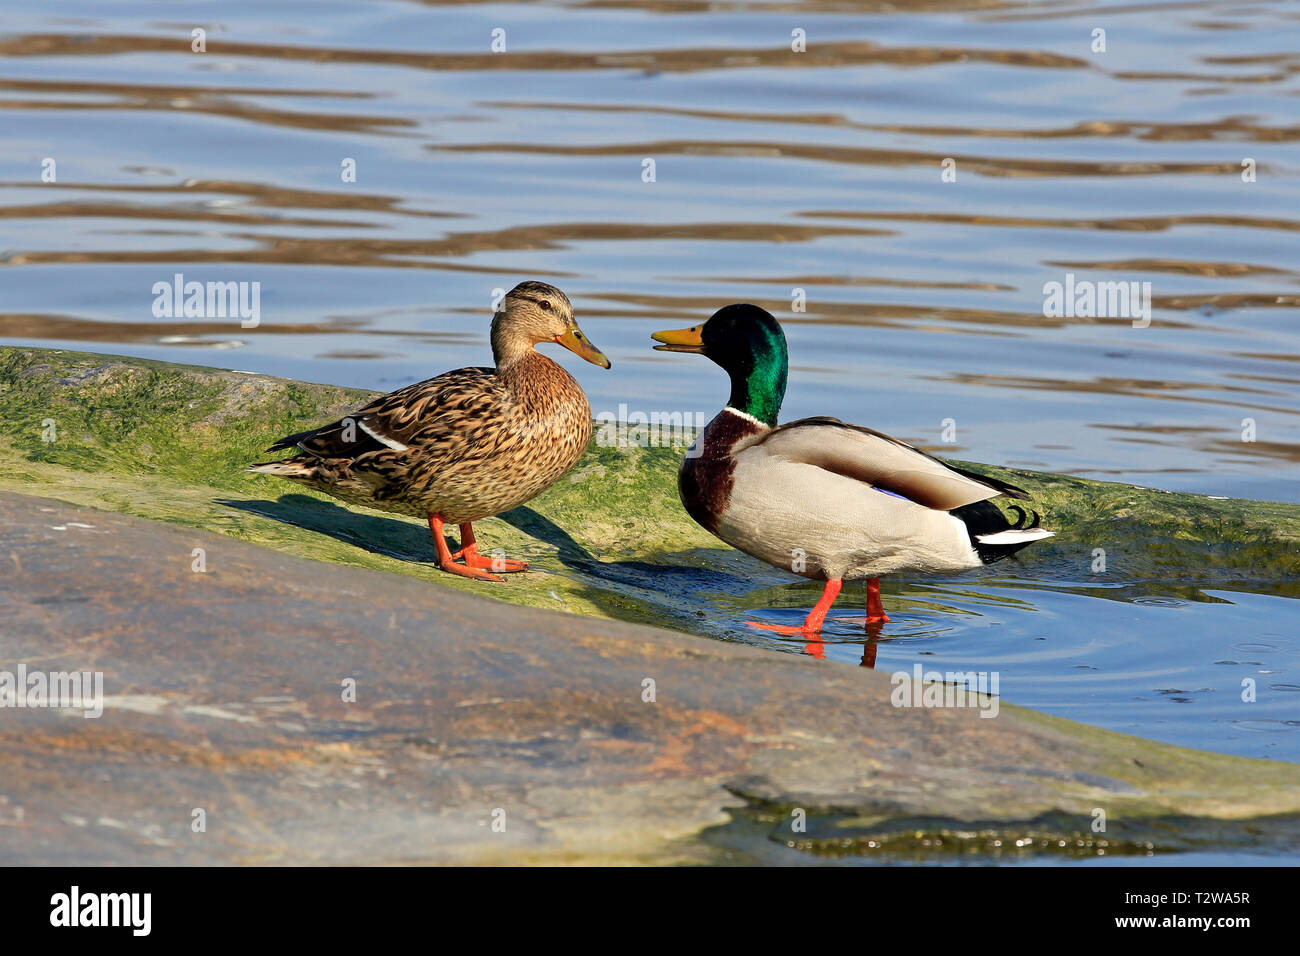 Female and male Mallard, Anas platyrhynchos, courting on a seaside rock on a beautiful day of spring. Stock Photo